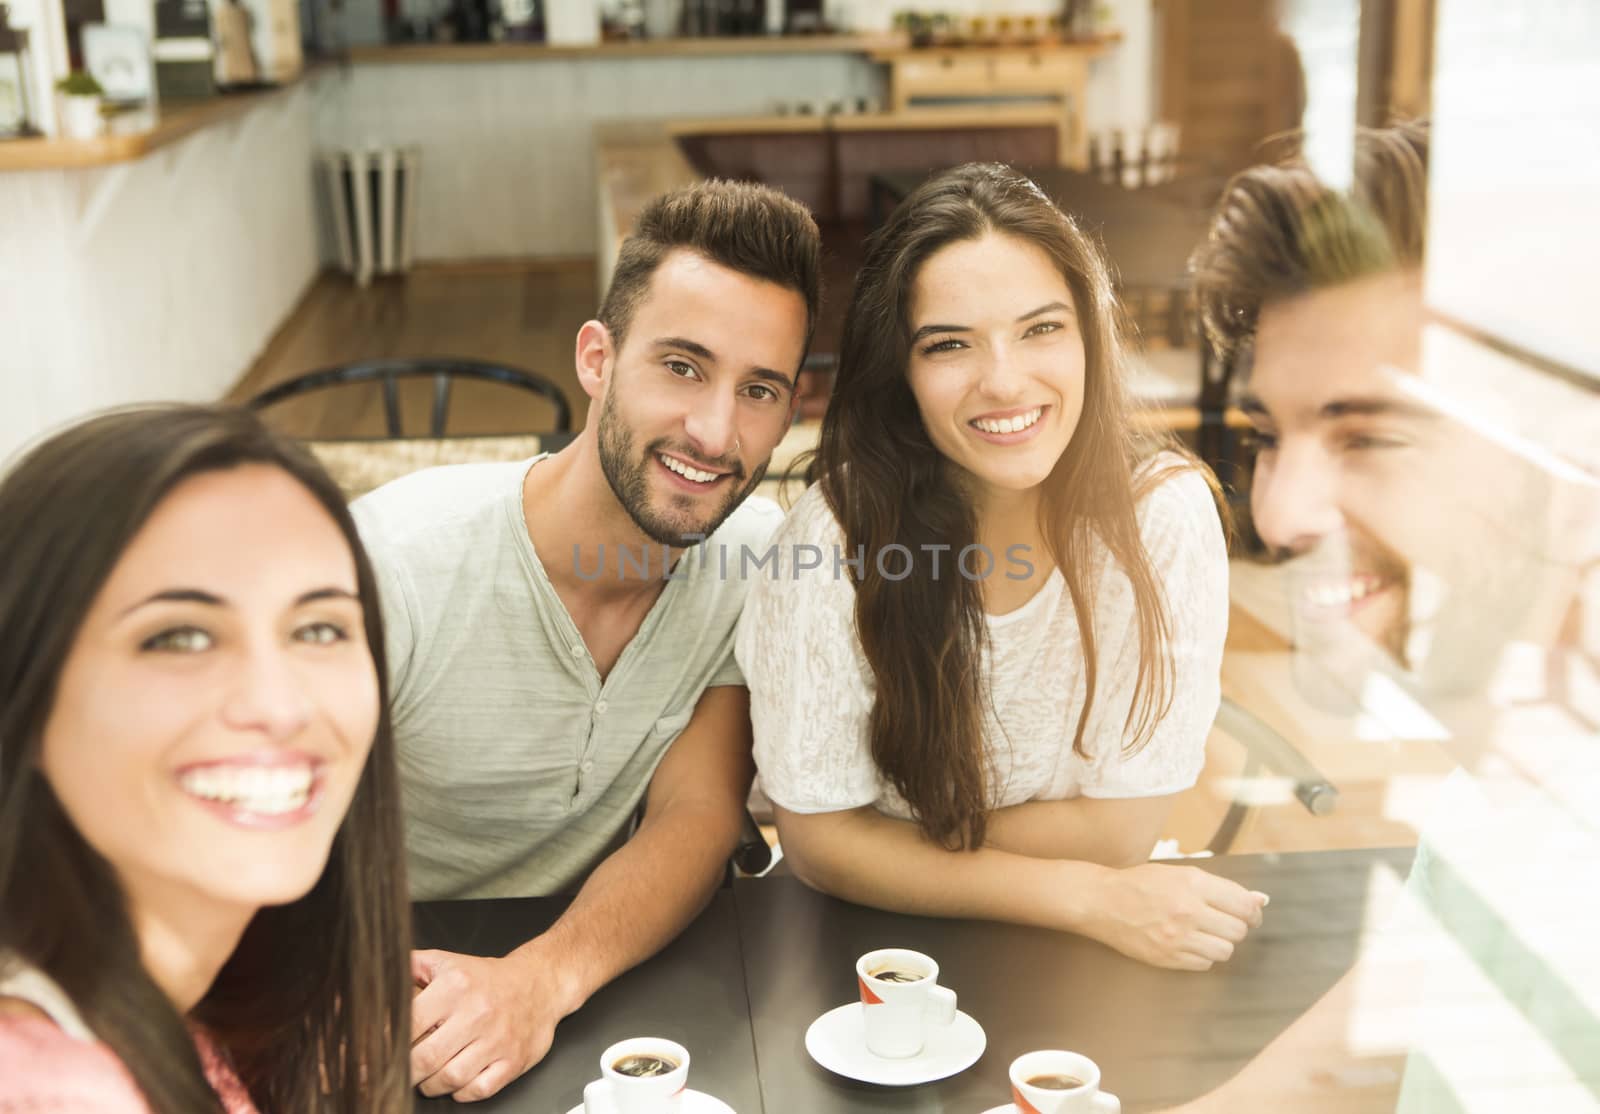 Friends having a great day at the local coffee shop